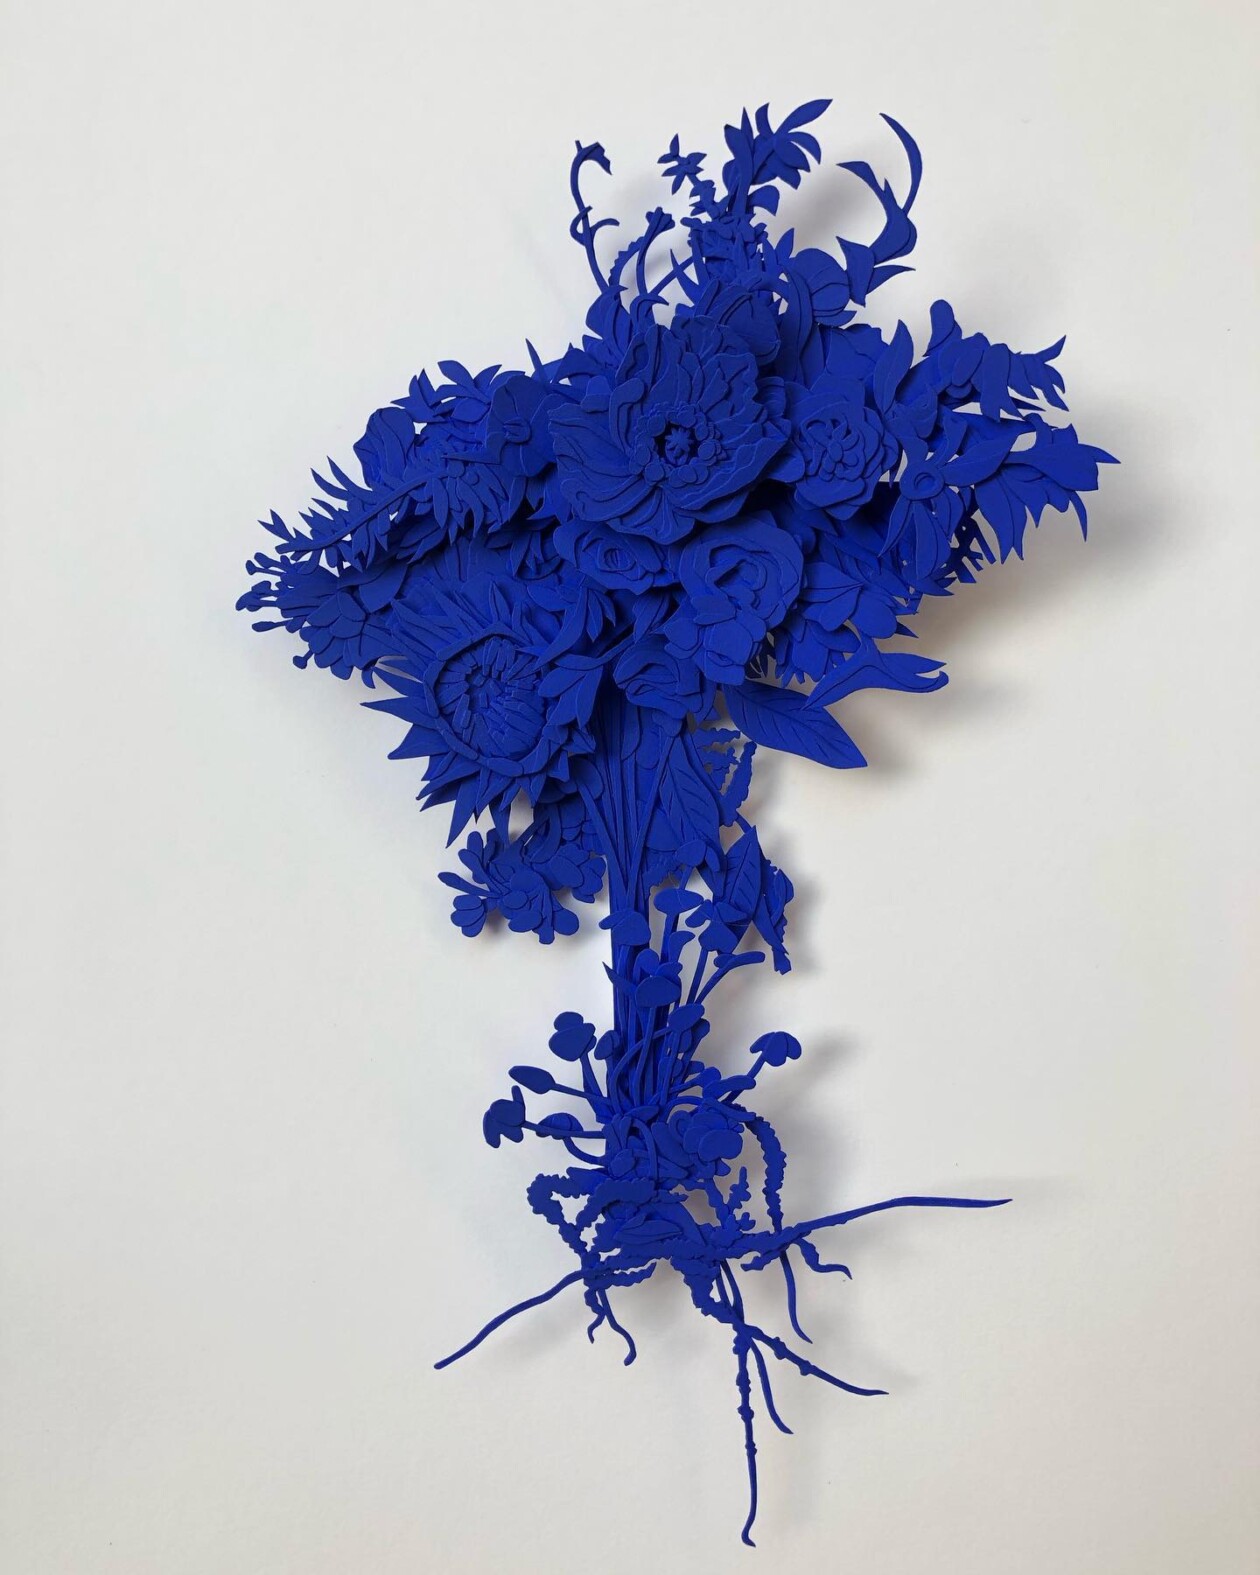 Gorgeously Intricate Floral Paper Cutting Sculptures By Joey Bates (4)